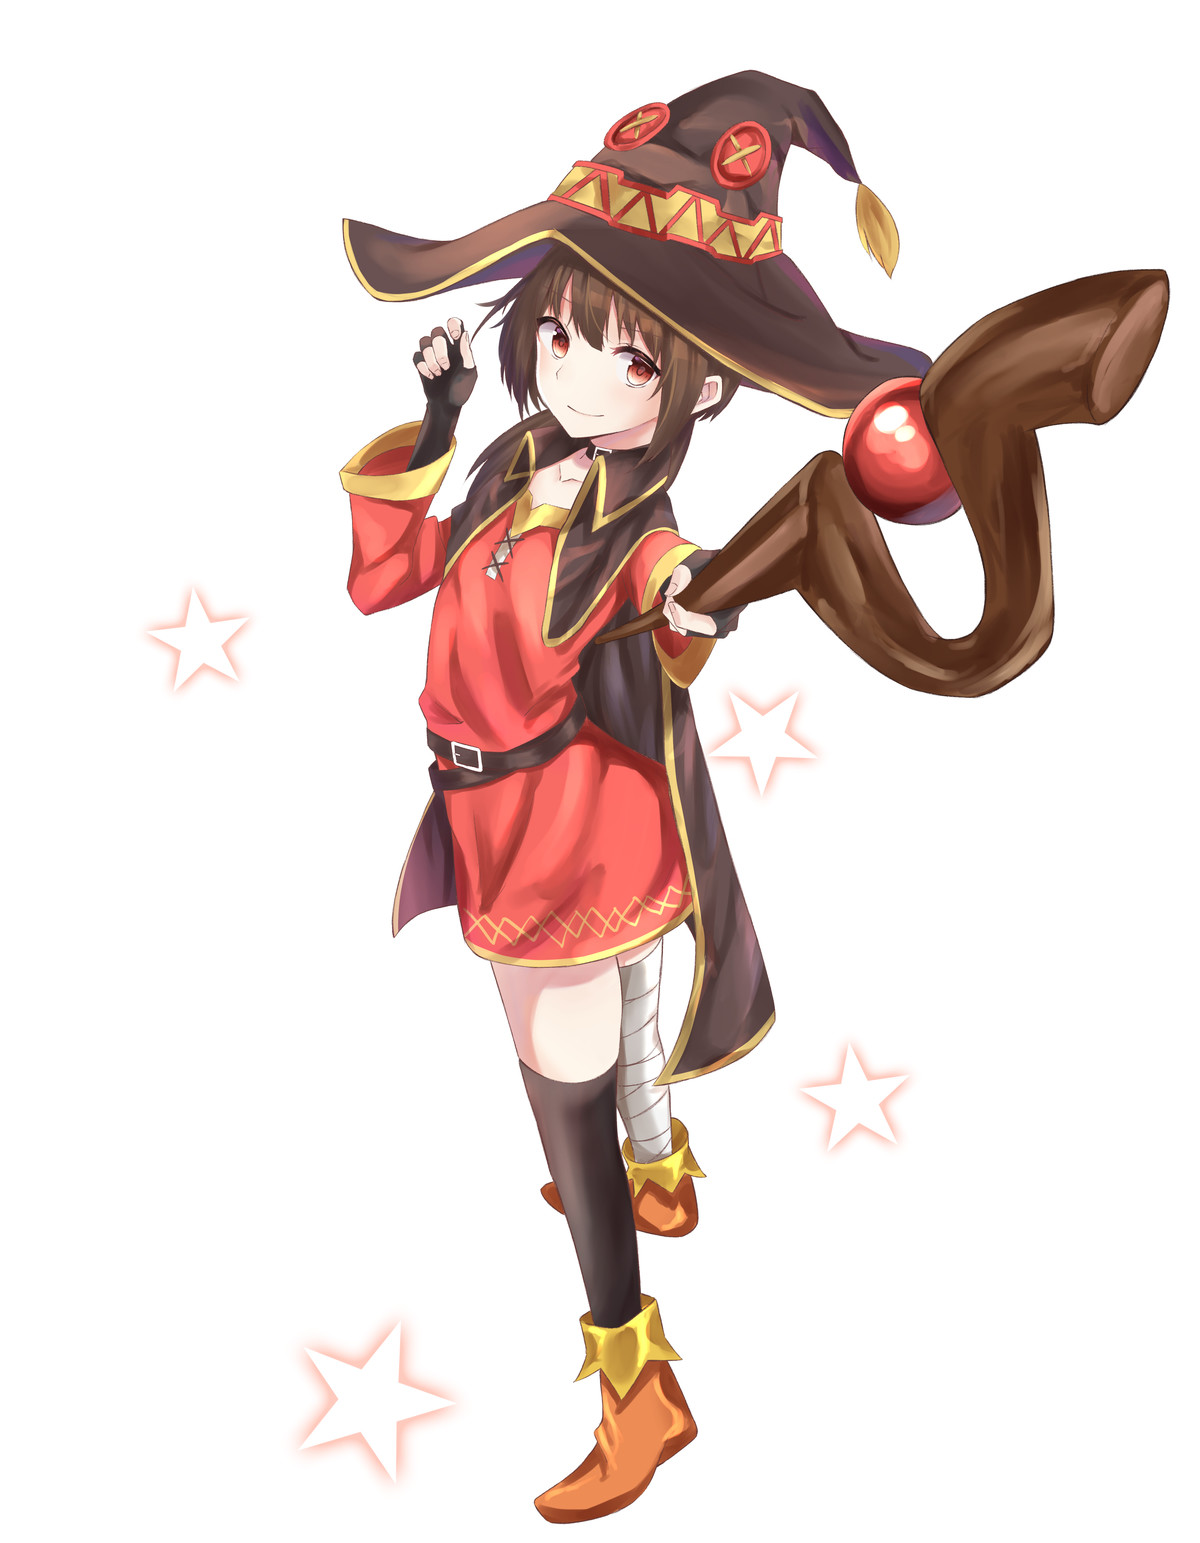 Daily Megu - 1128: Just Megu. join list: DailySplosion (827 subs)Mention History Source: .